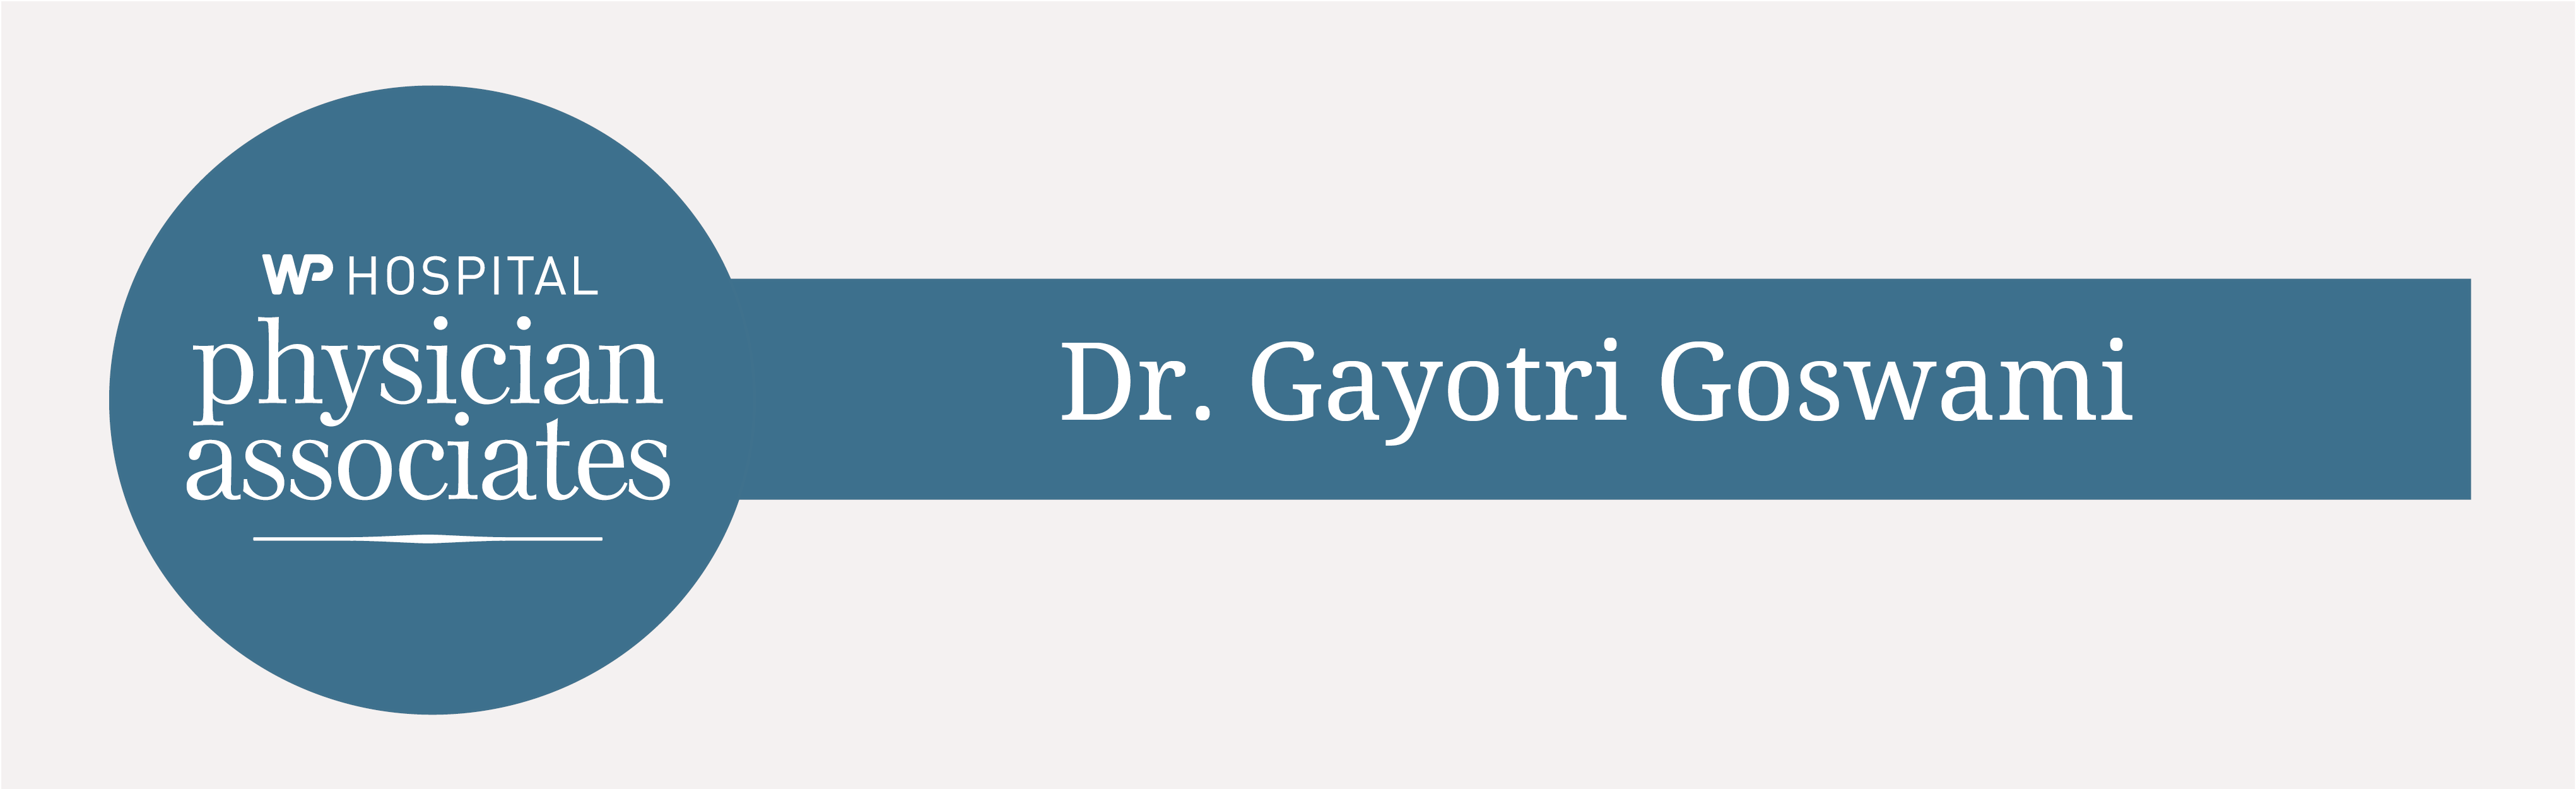 Endocrinologist Dr. Gayotri Goswami Joins WPHPA